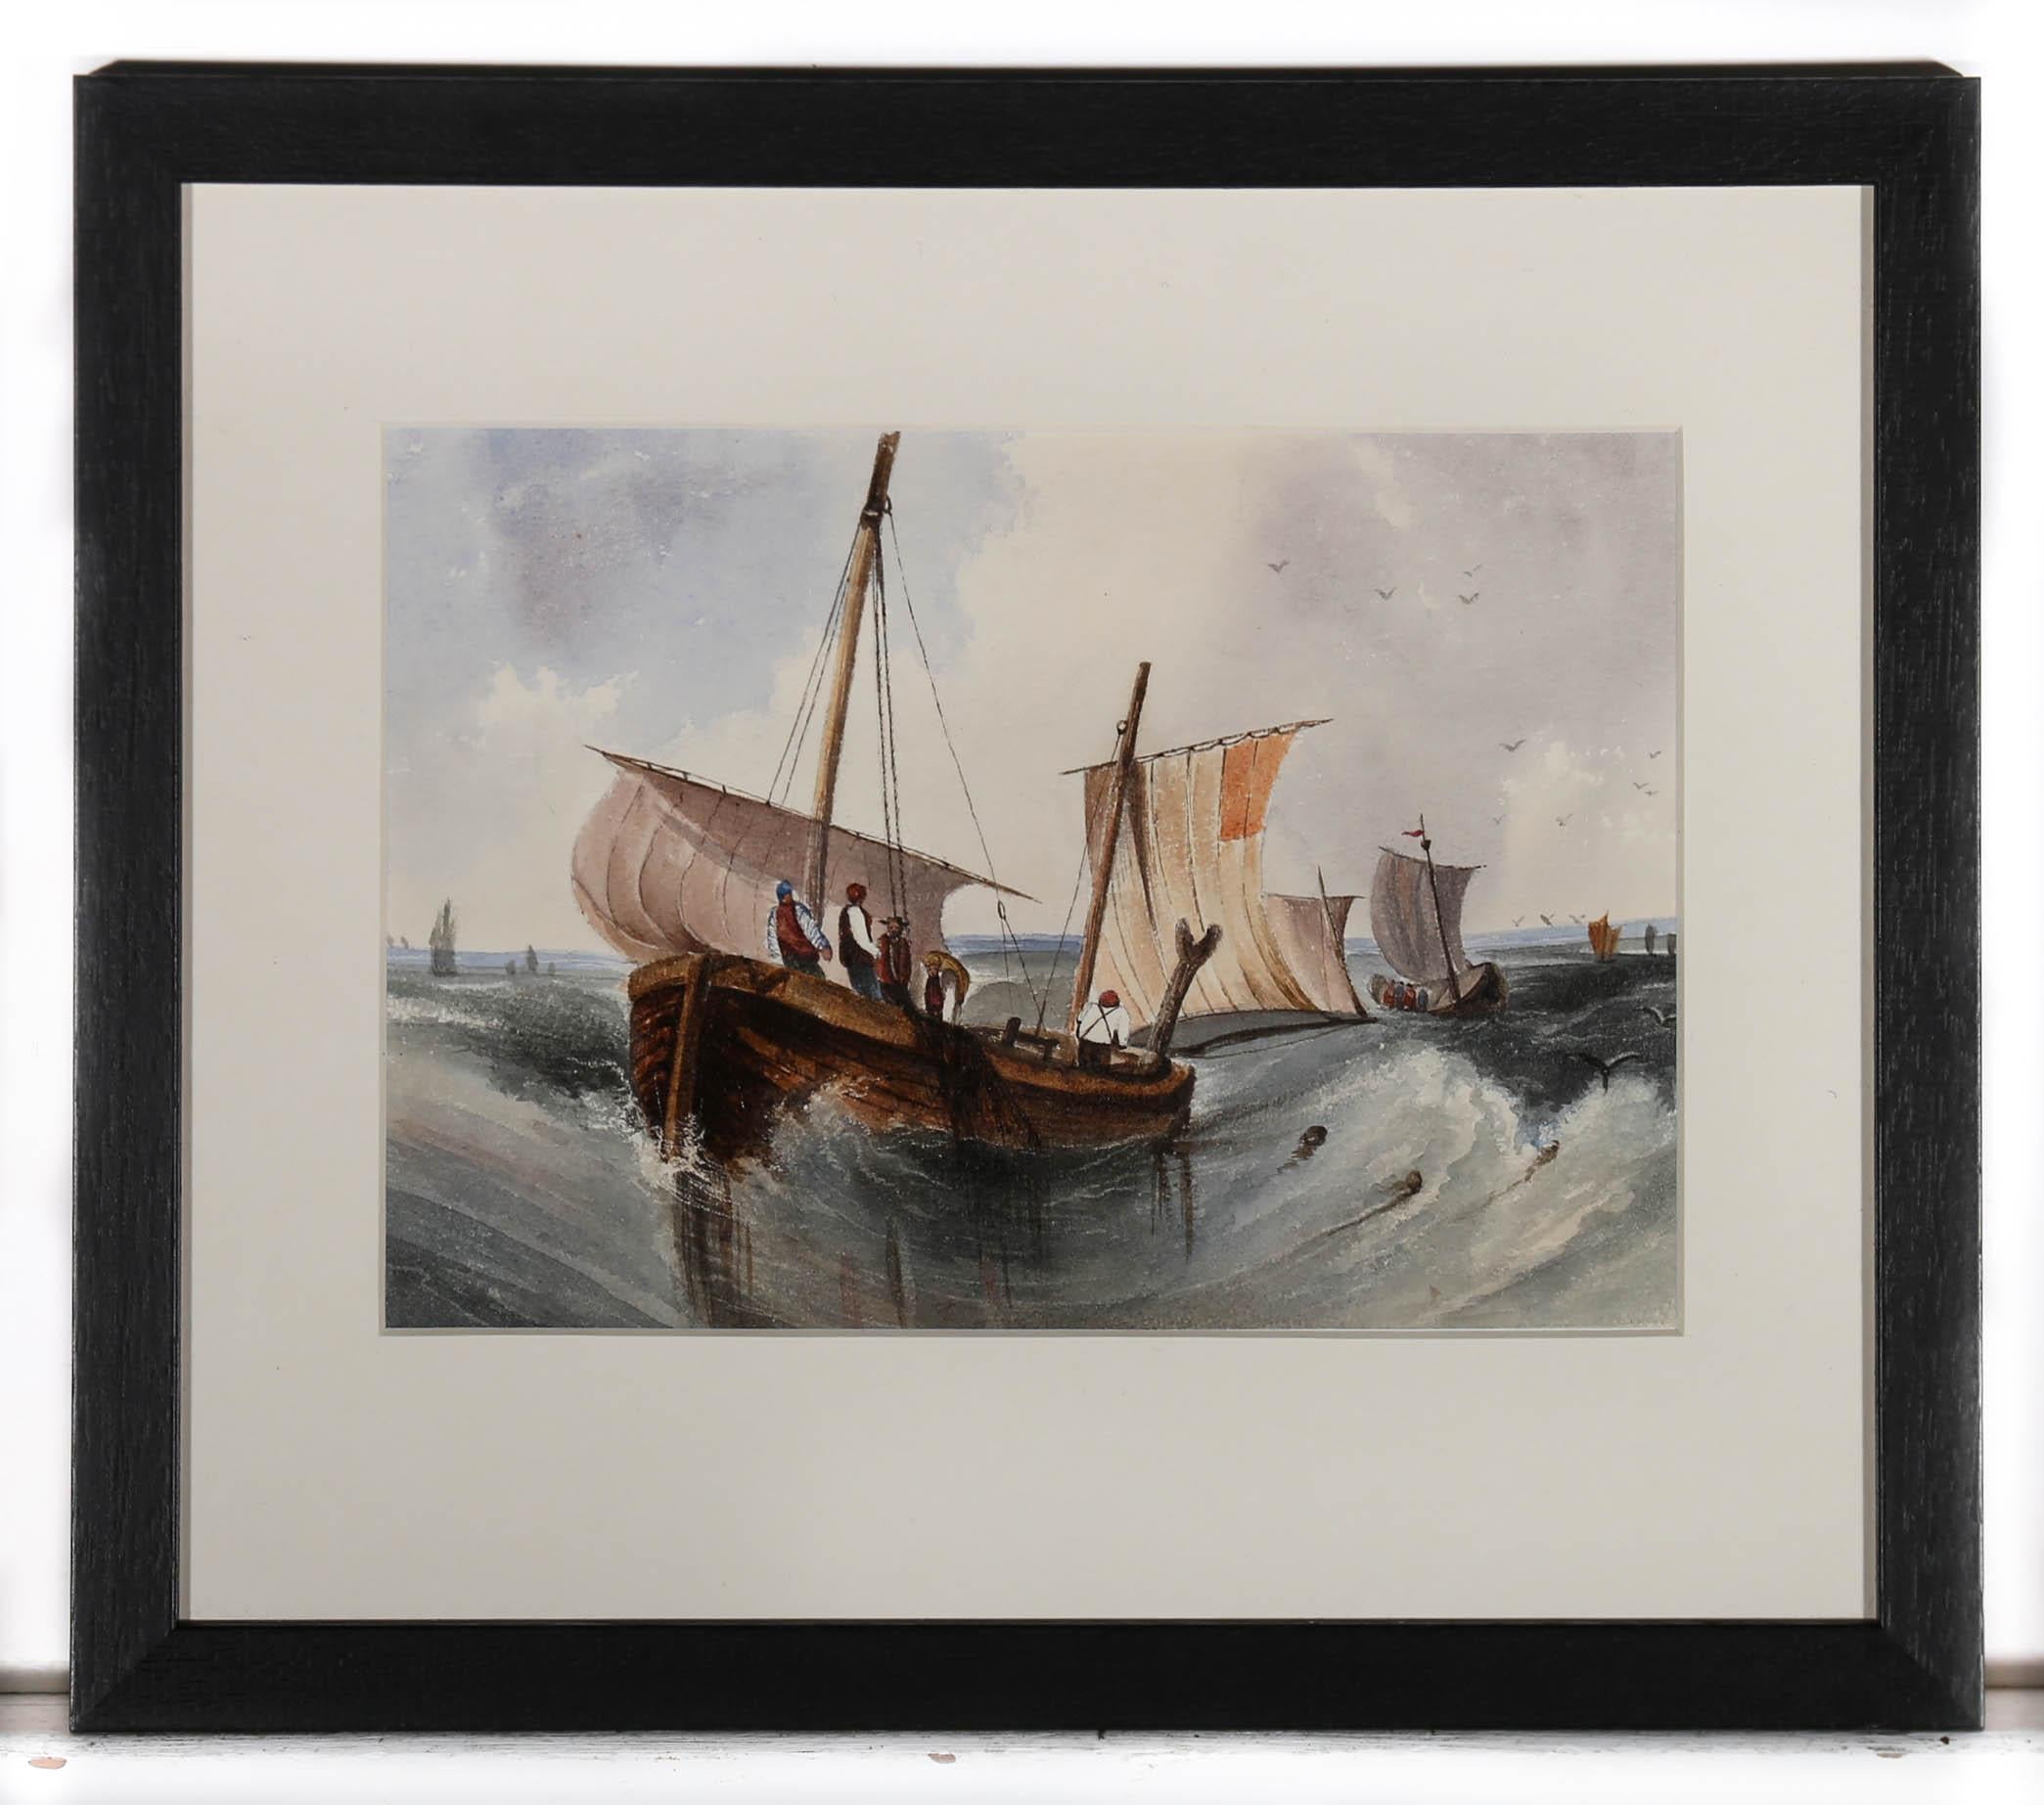 A charming watercolour scene from the 19th century period, depicting a group of sailors out in a rocky swell. Boats can be seen swaying from side to side as the men on board brace to ride out these gut churning waves. Unsigned. The nautical scene